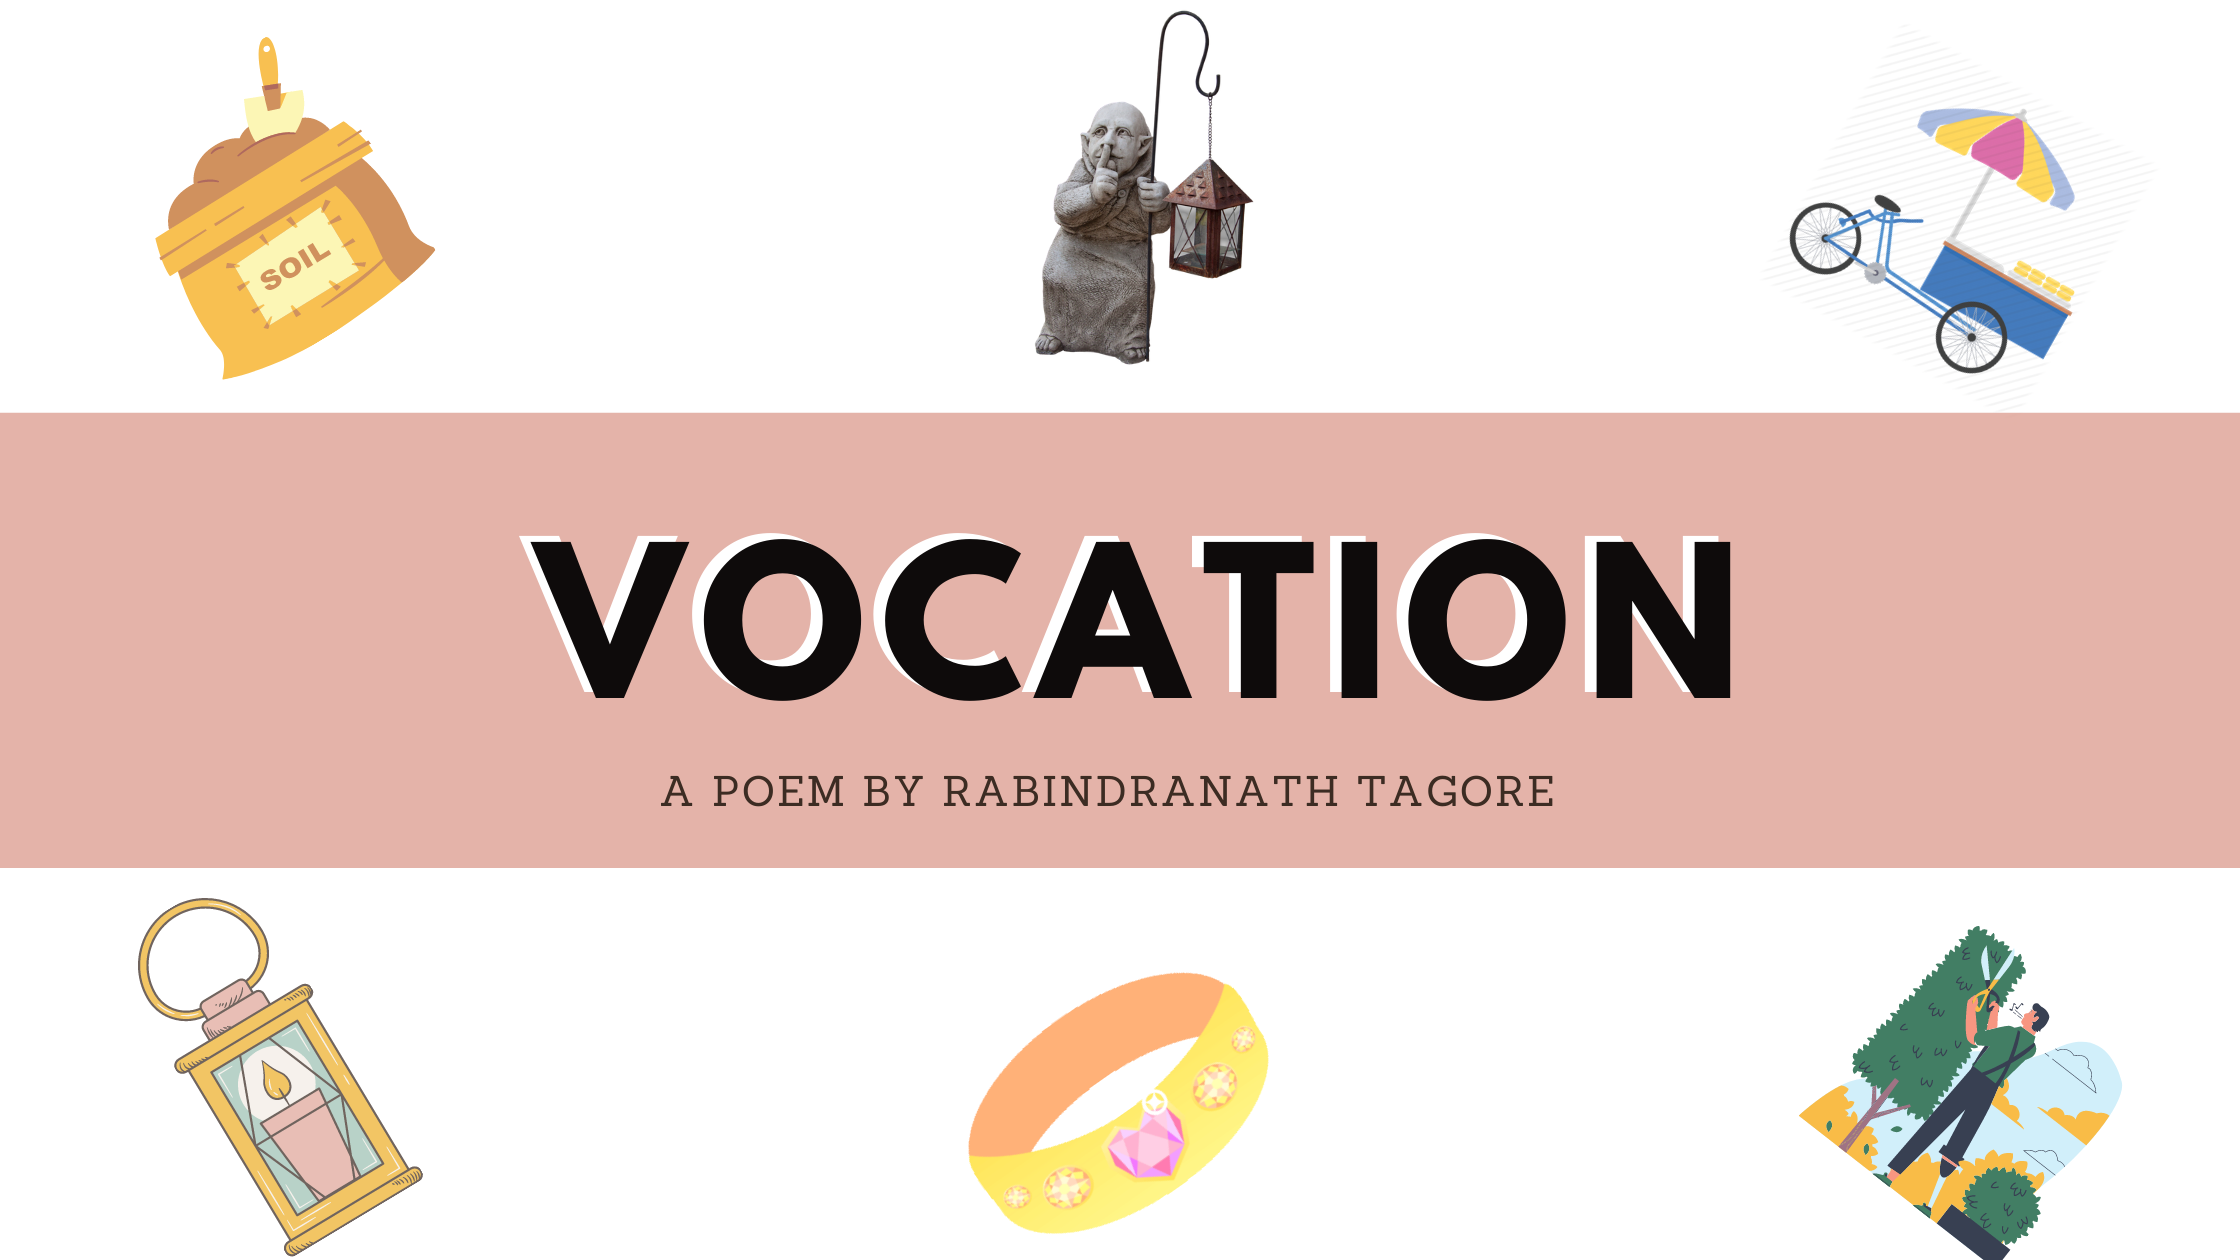 Vocation by Rabindranath Tagore